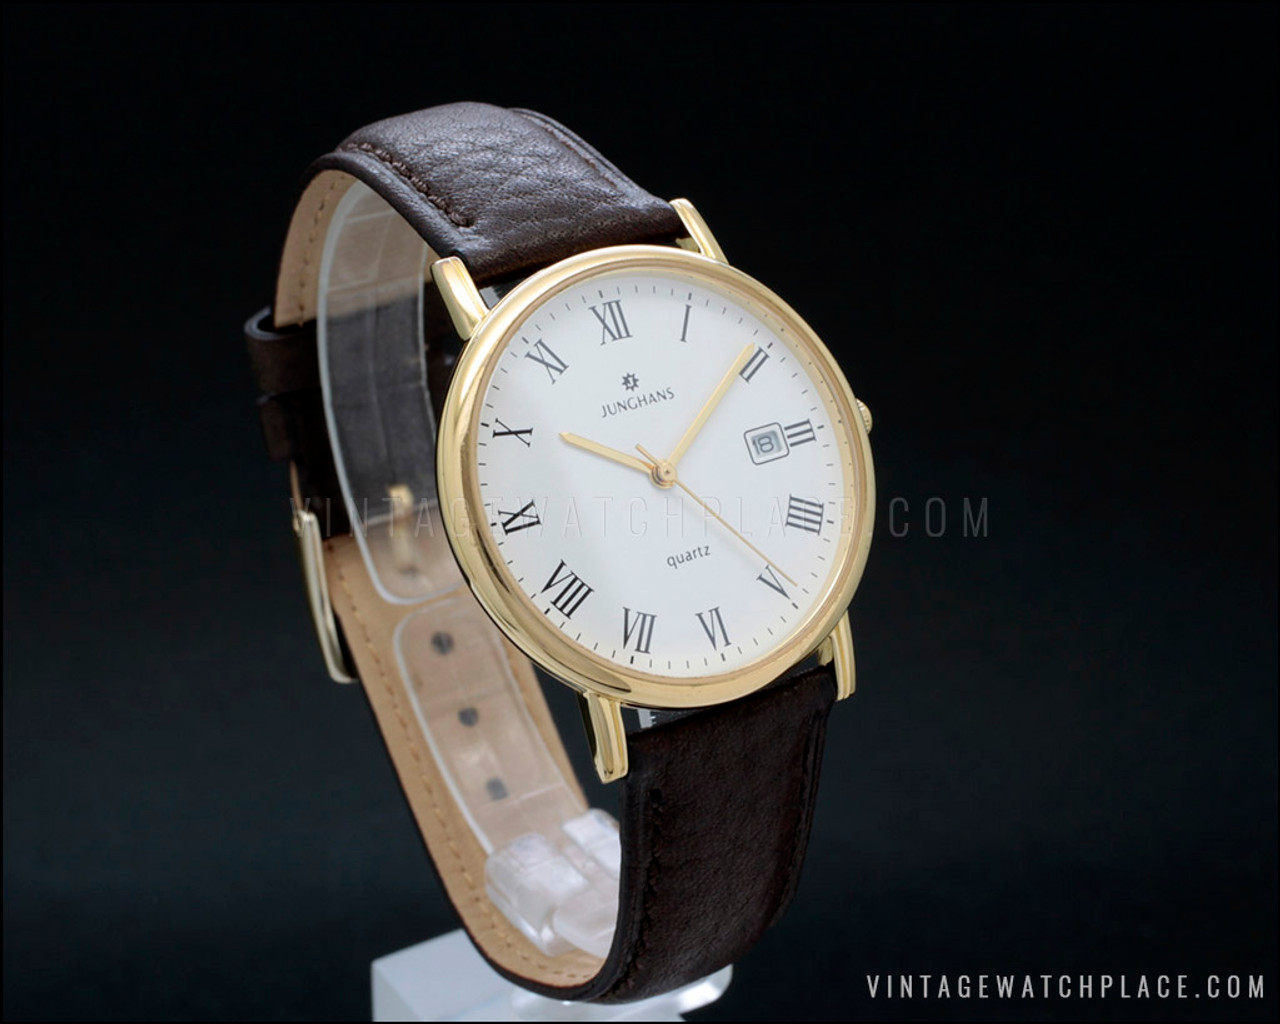 New Old Stock Junghans dress quartz vintage watch, from the 80's ...